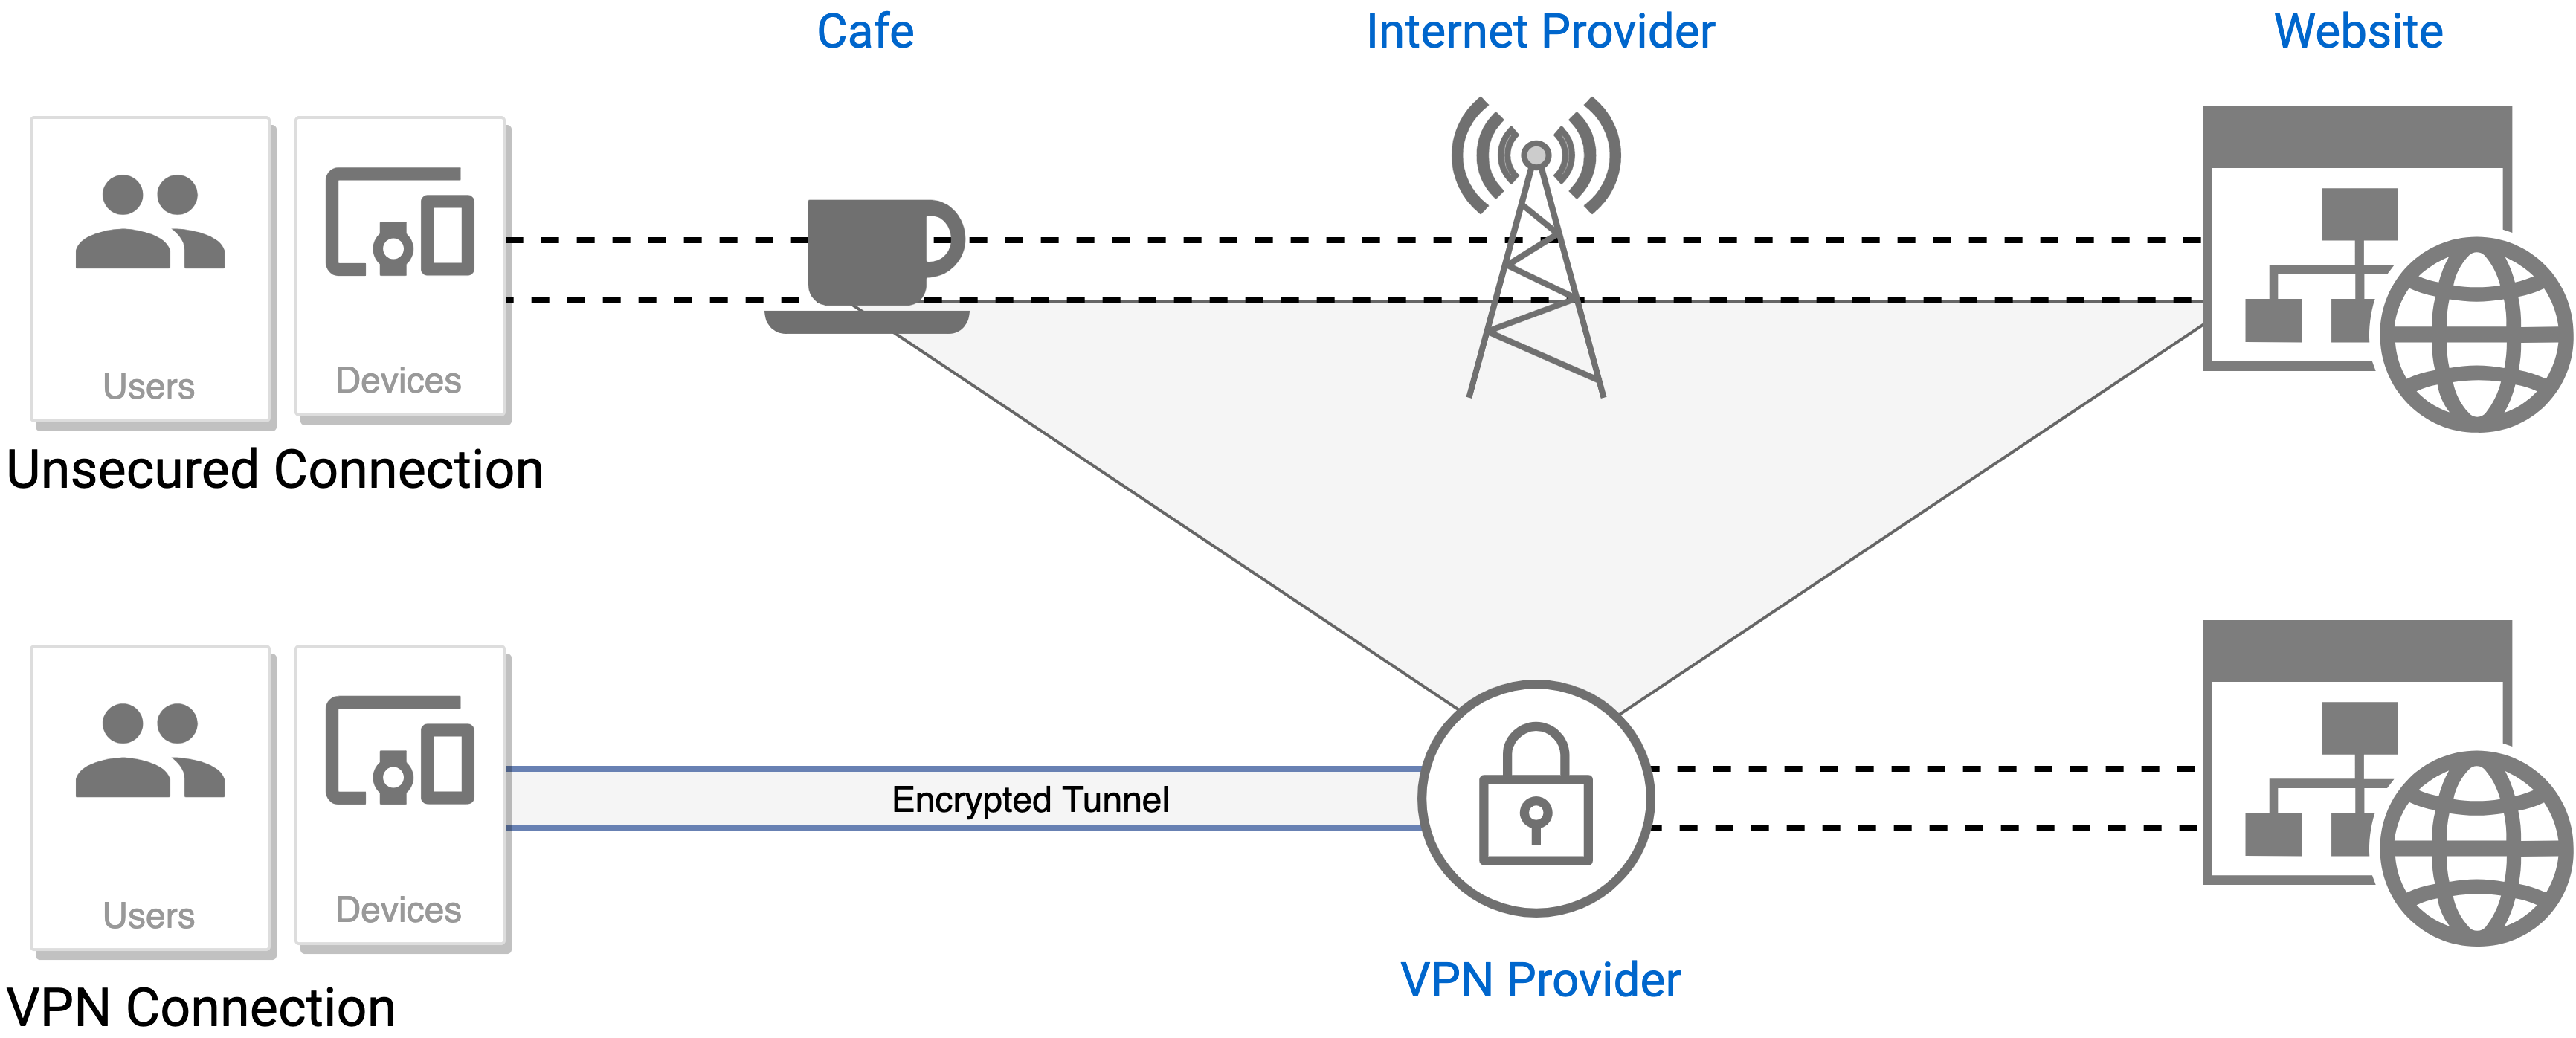 How do I setup a VPN on my router?